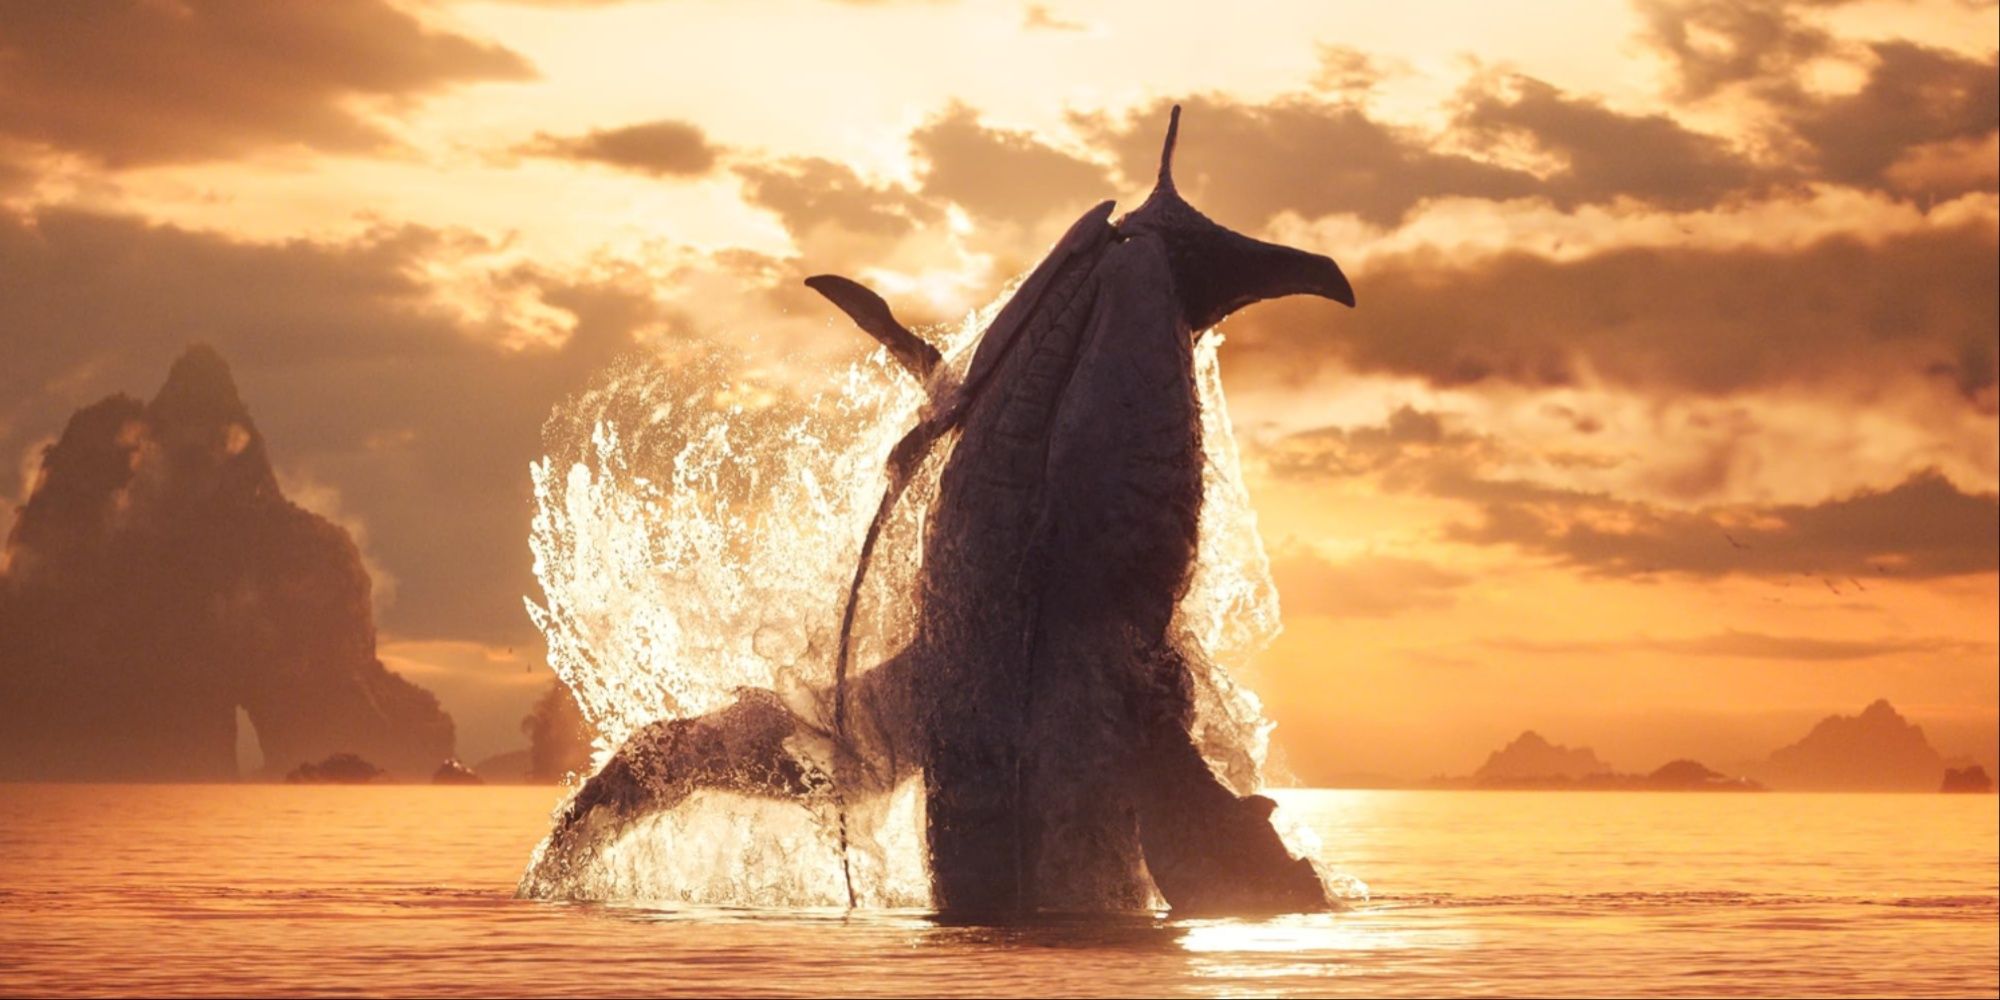 A Tulkun emerging from the ocean with a splash as the sun sets behind the whale.